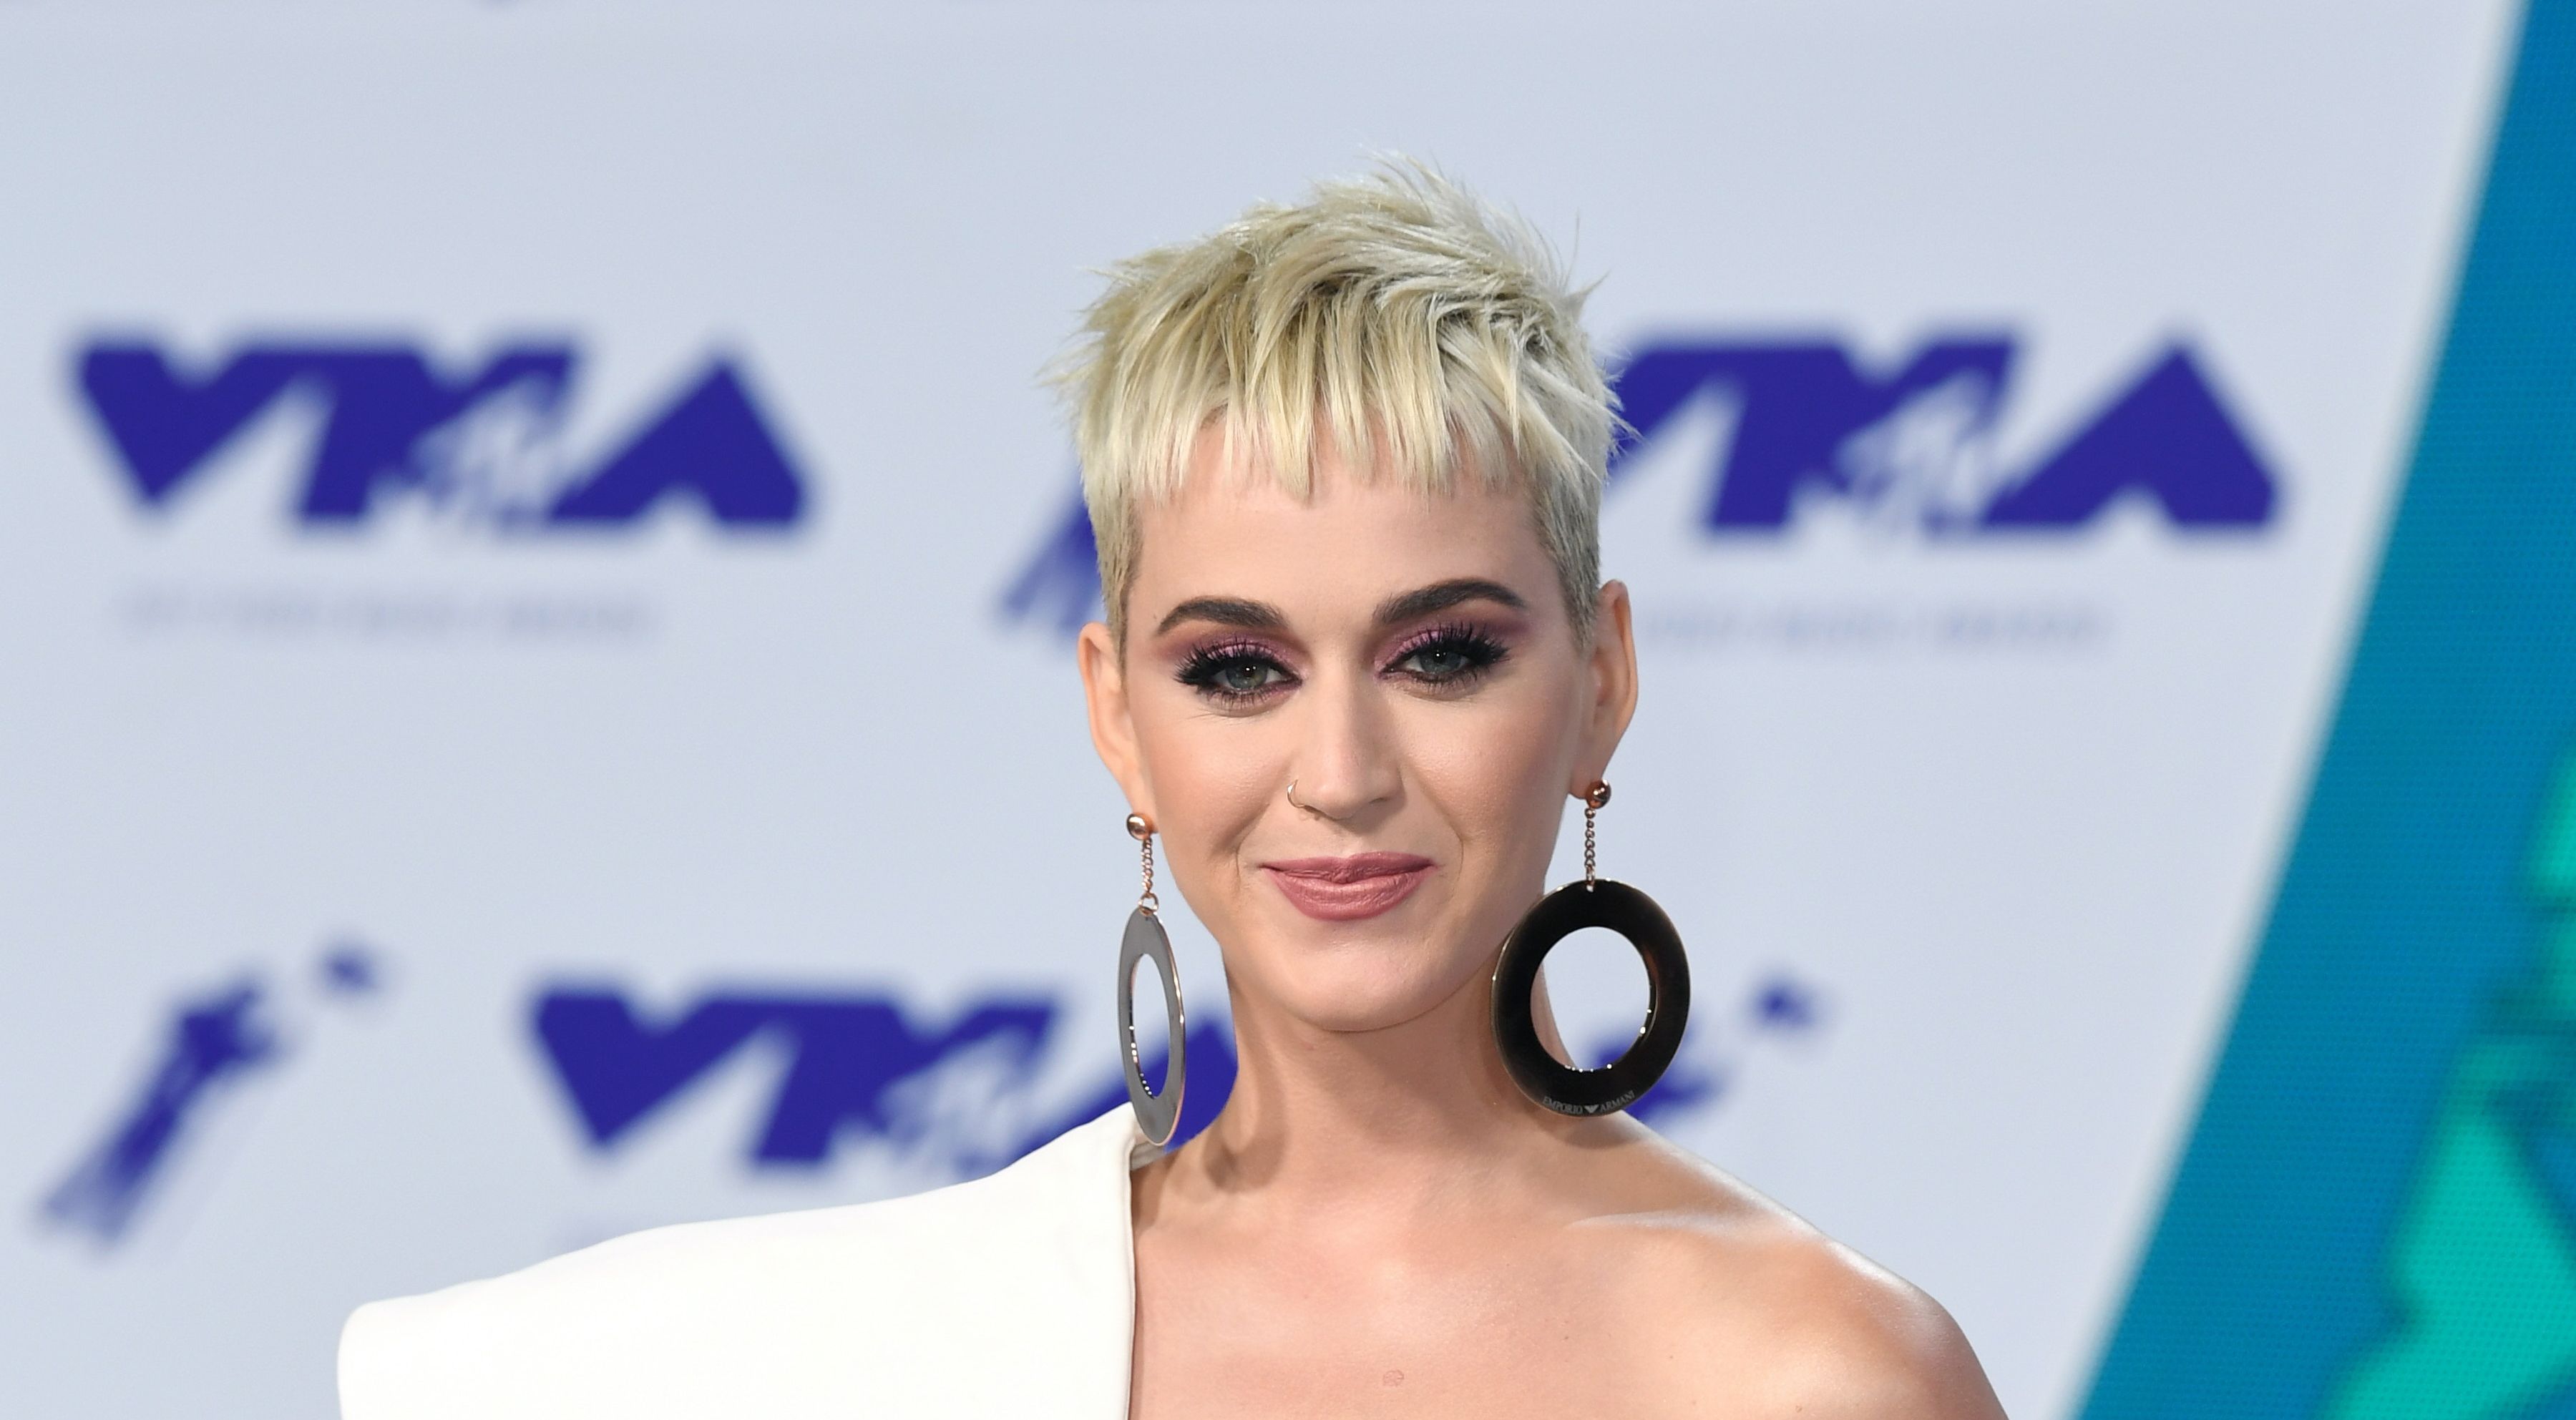 Katy Perry praises 'gentleman' Harry Styles after chance meeting on flight  